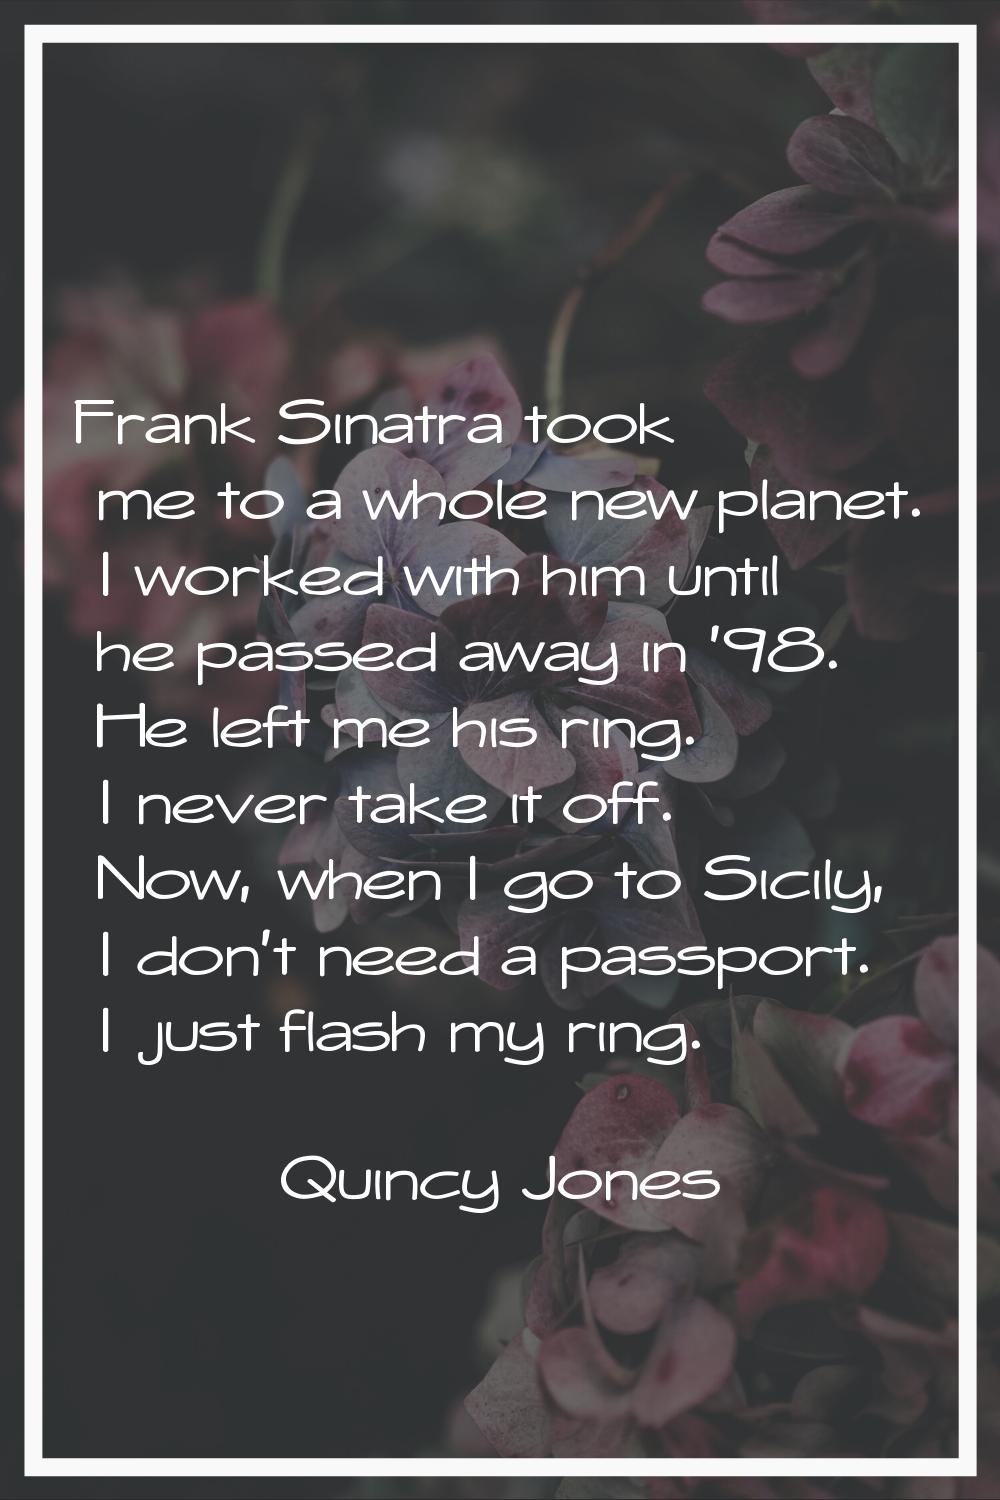 Frank Sinatra took me to a whole new planet. I worked with him until he passed away in '98. He left